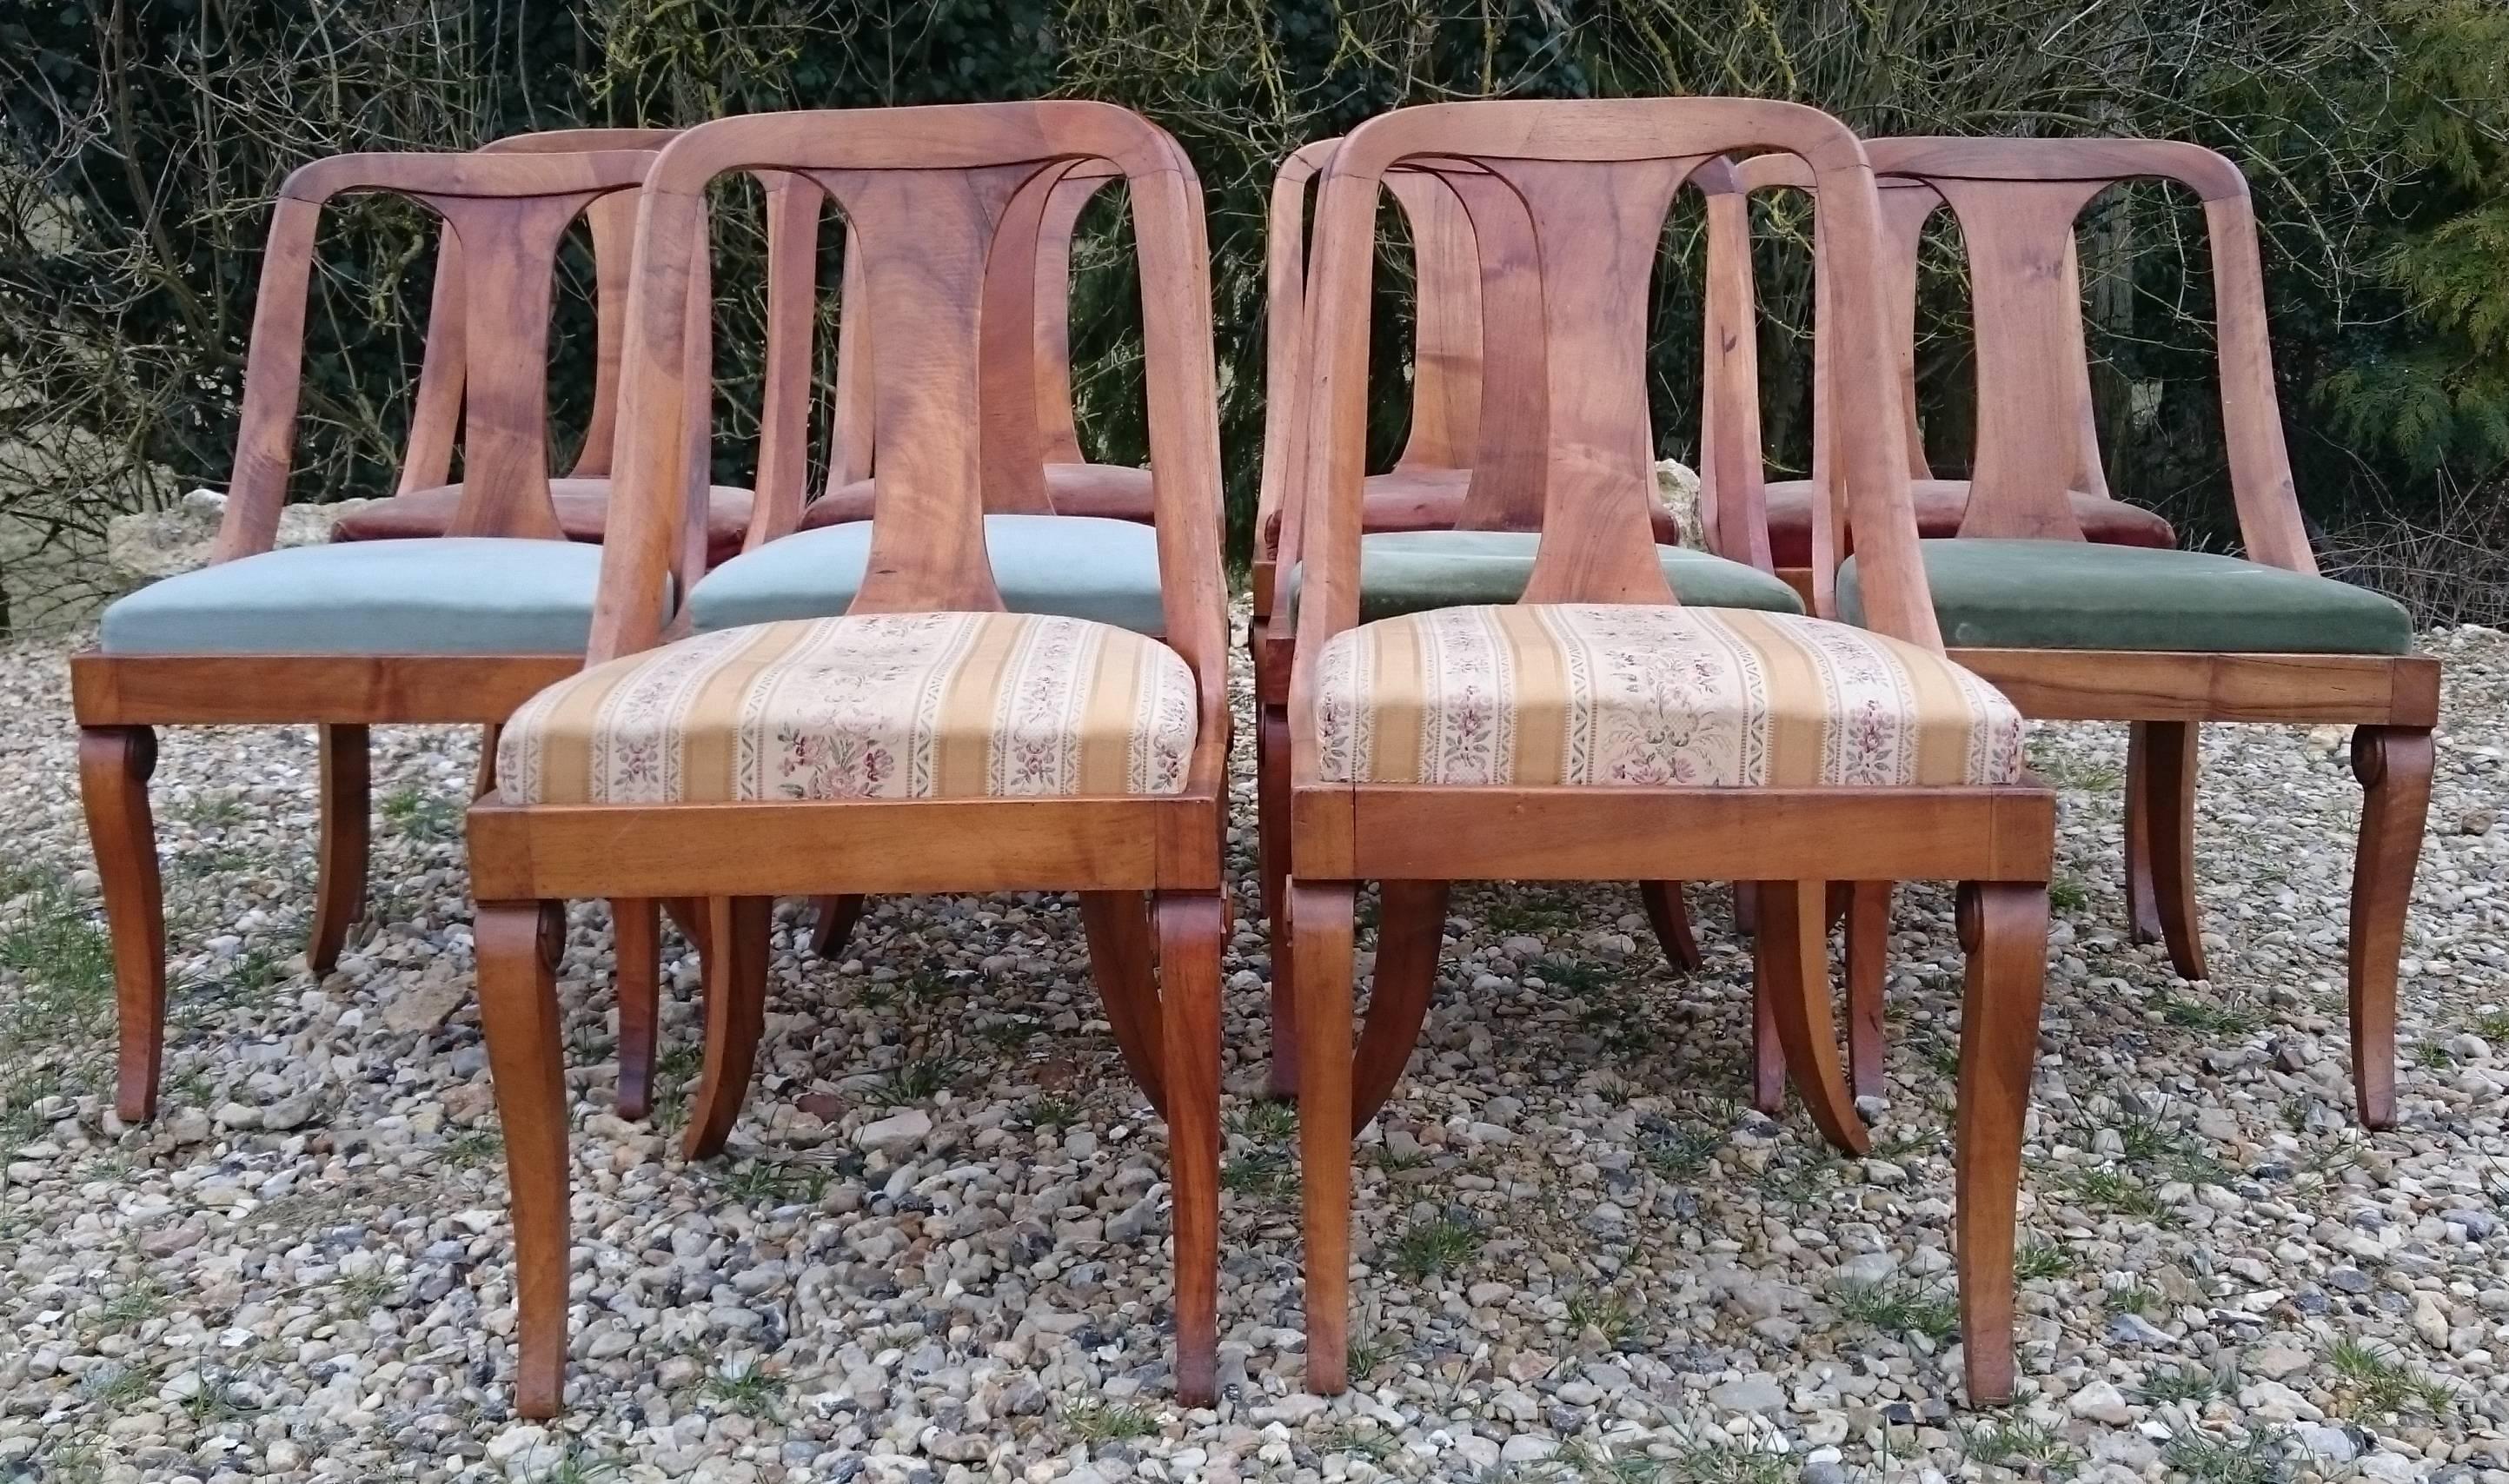 Set of ten 19th century elegant antique walnut Biedermeier dining chairs. This set of chairs have a generous splay to the legs, they have comfortable drop-on seat squabs and they are a good golden colour. This is a very well drawn set of chairs